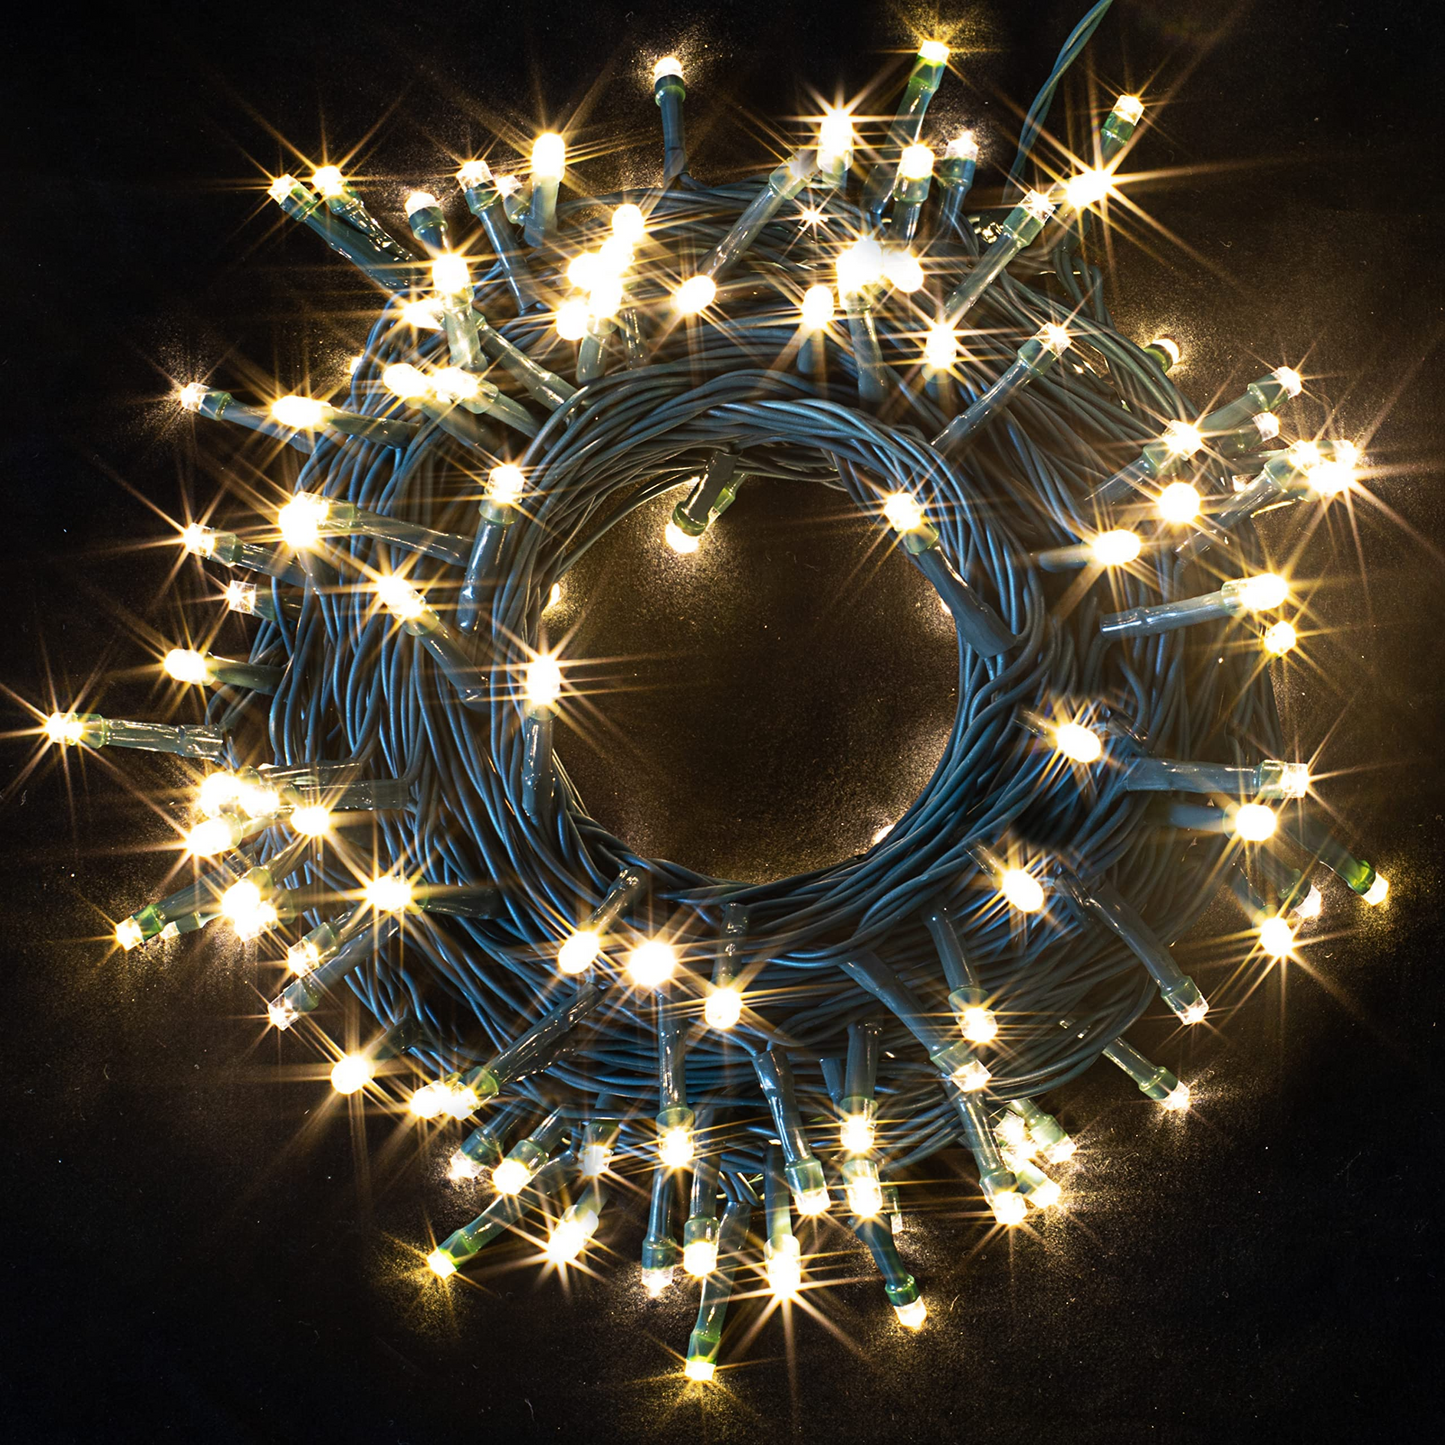 100 Warm White LED Green Wire String Lights, 8 Modes